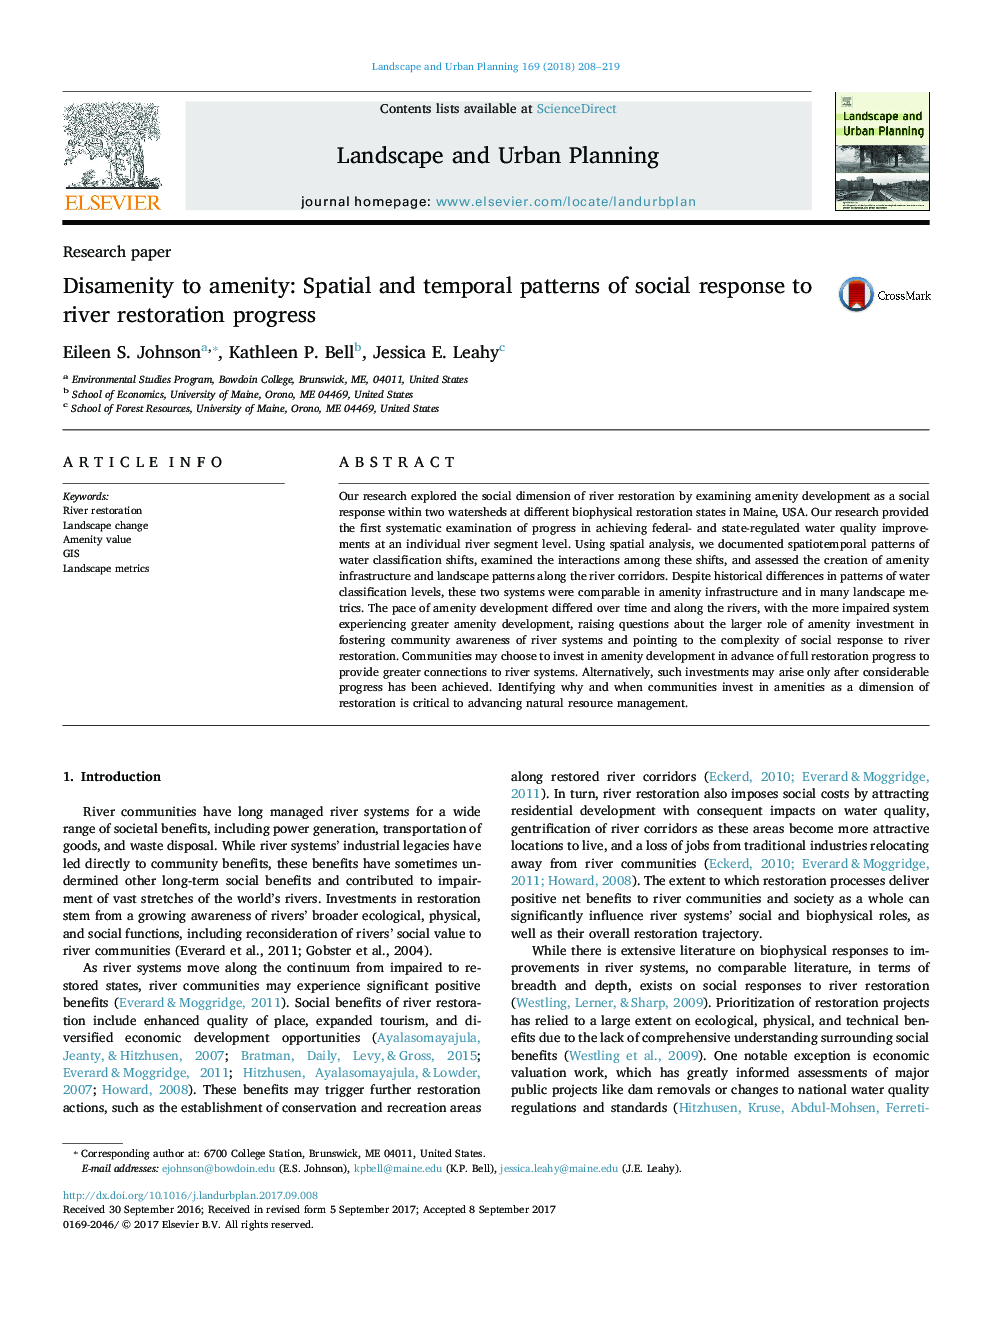 Disamenity to amenity: Spatial and temporal patterns of social response to river restoration progress